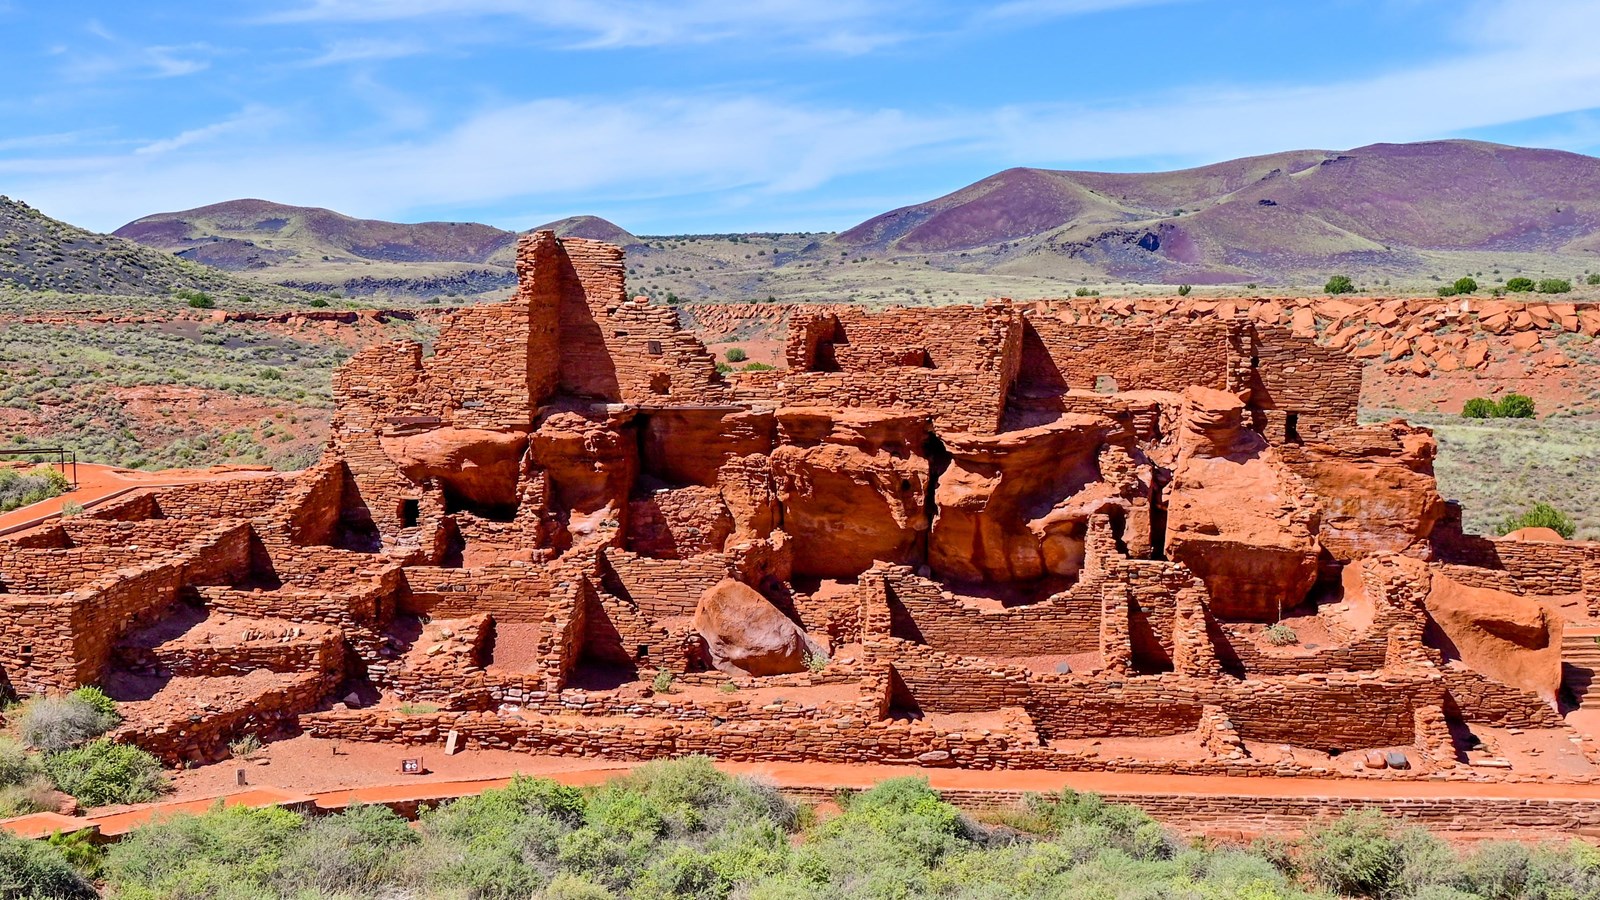 A large red sandstone pueblo with many visible rooms in a desert grassland with mountains behind.  